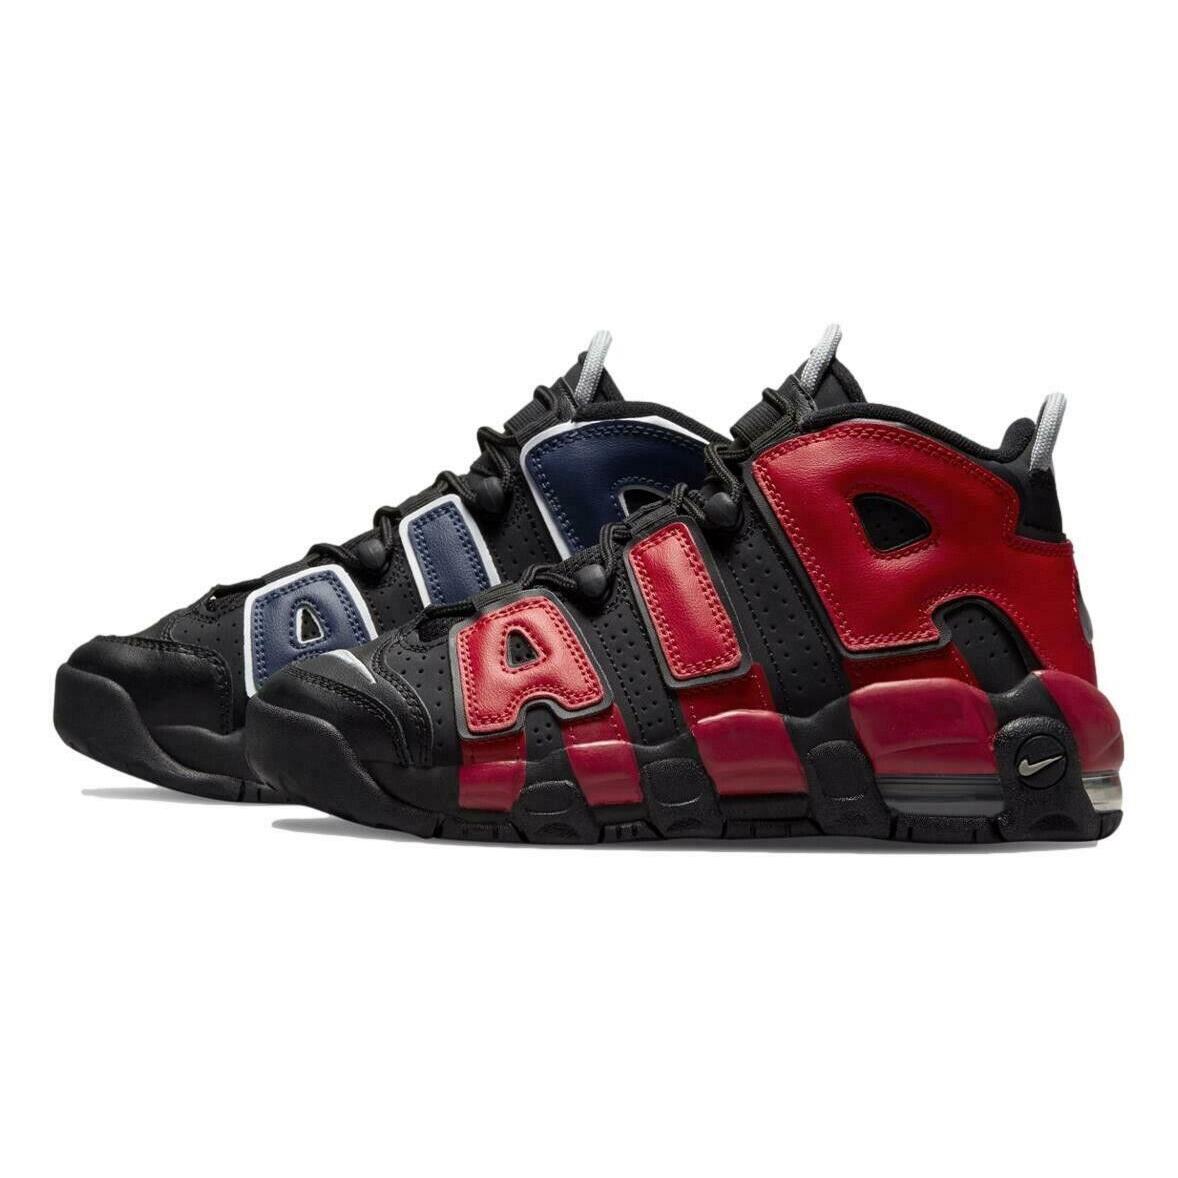 Nike Air More Uptempo Sneakers 6Y Black University Red Shoes Retro Kids